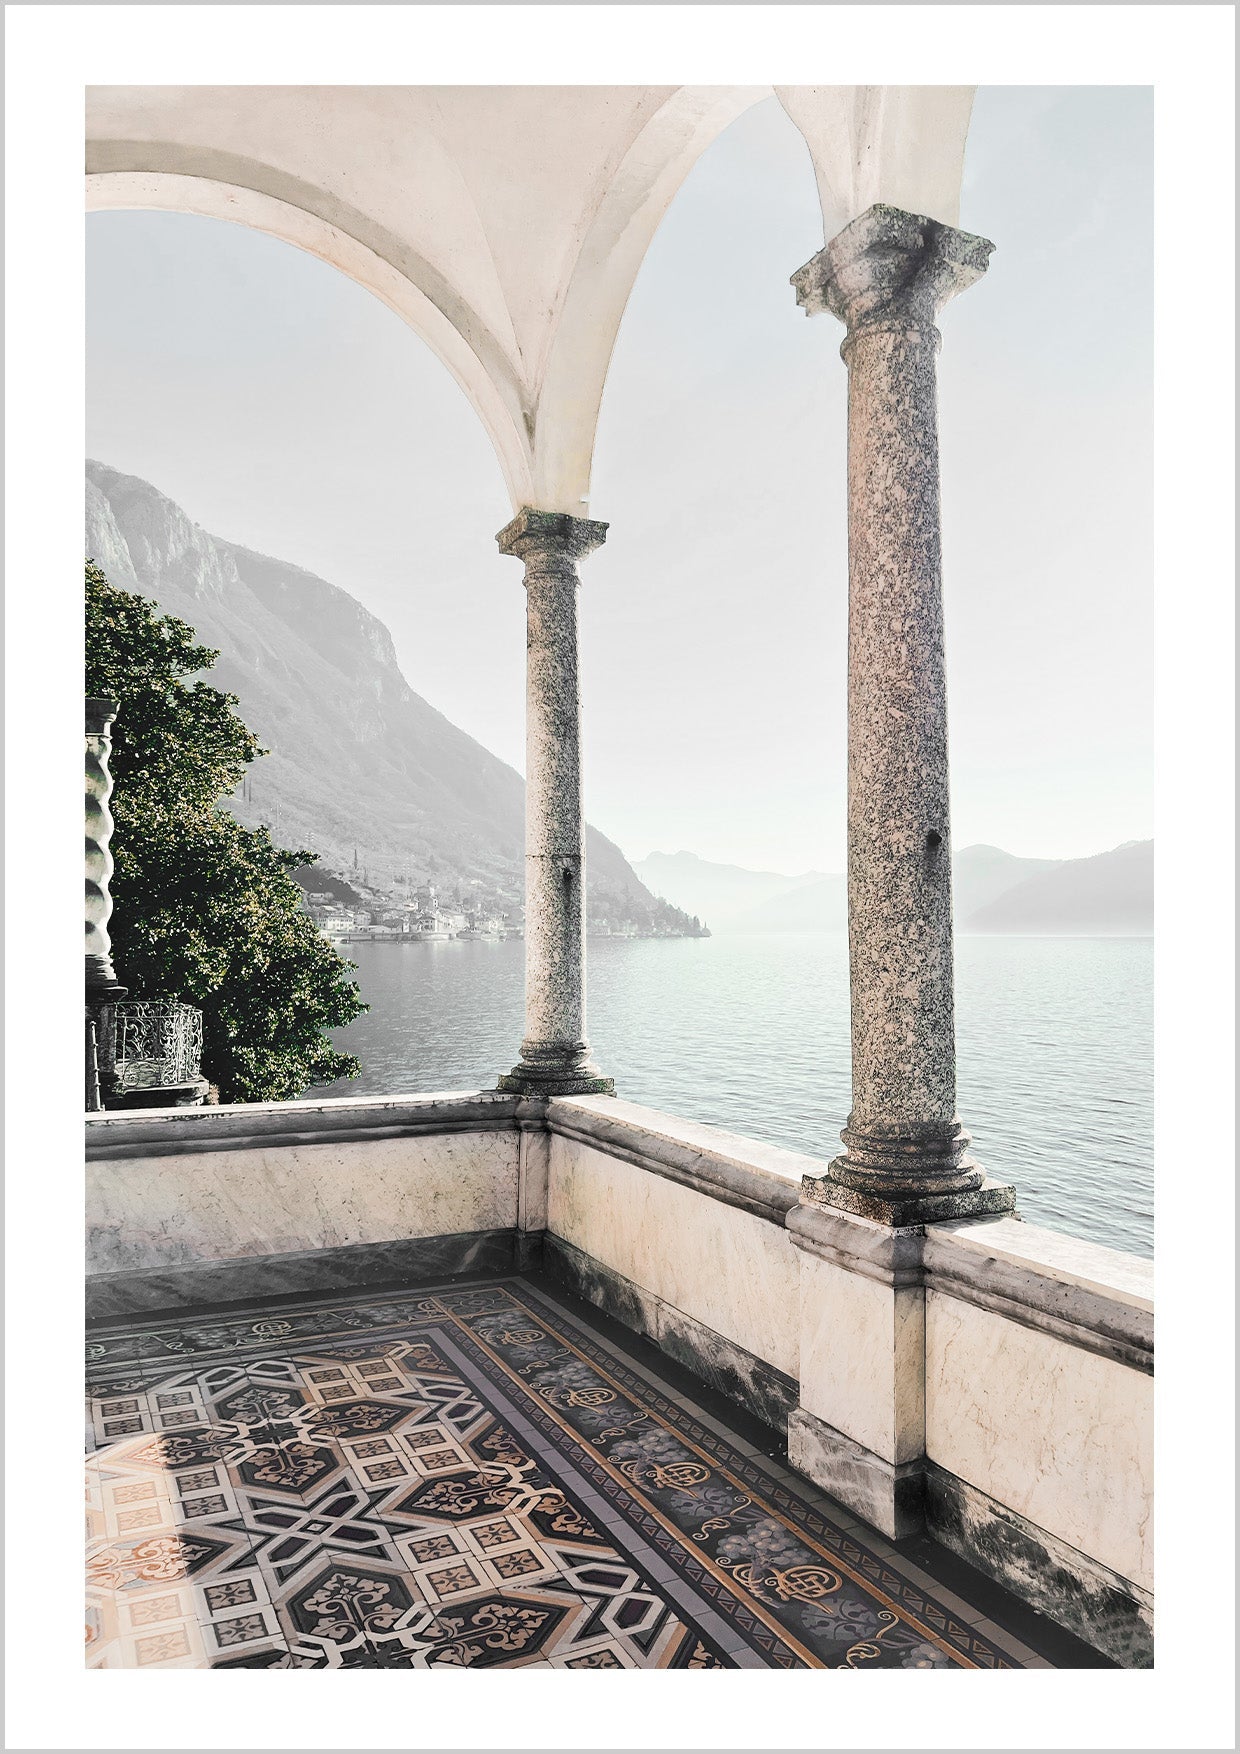 Photograph of the landscape of the lake Garda